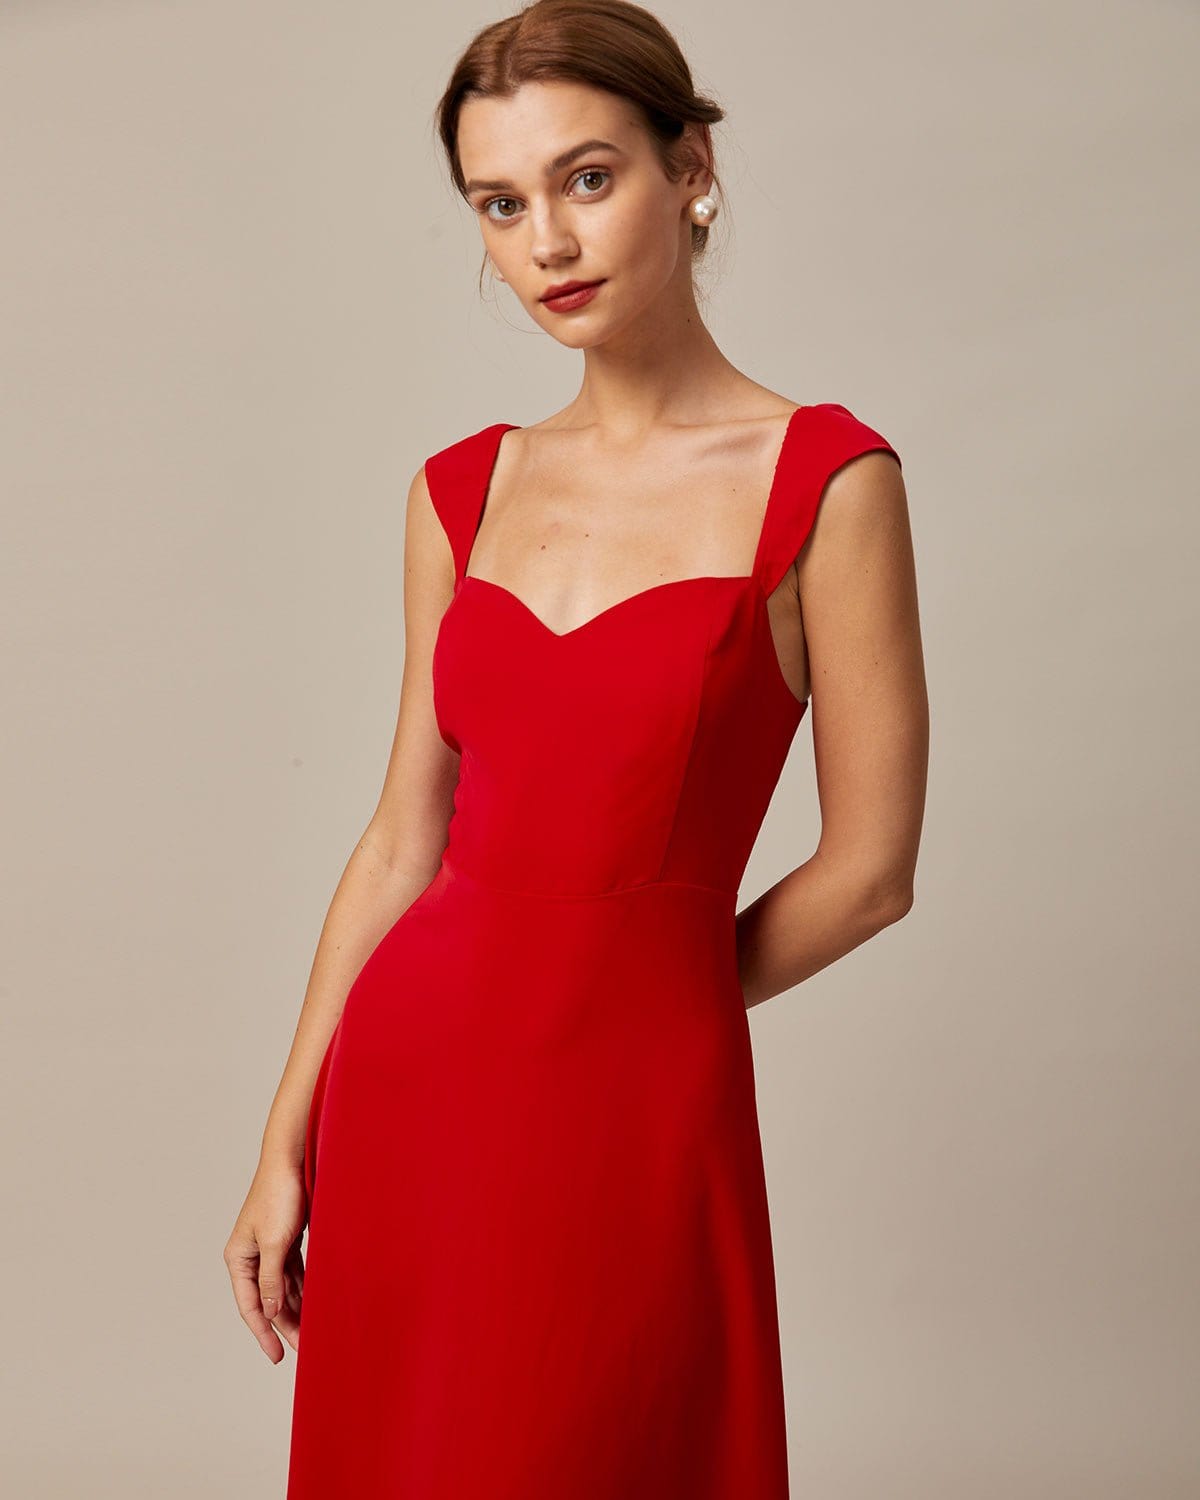 Red Dresses for Women, Red Prom, Midi & Evening Dresses